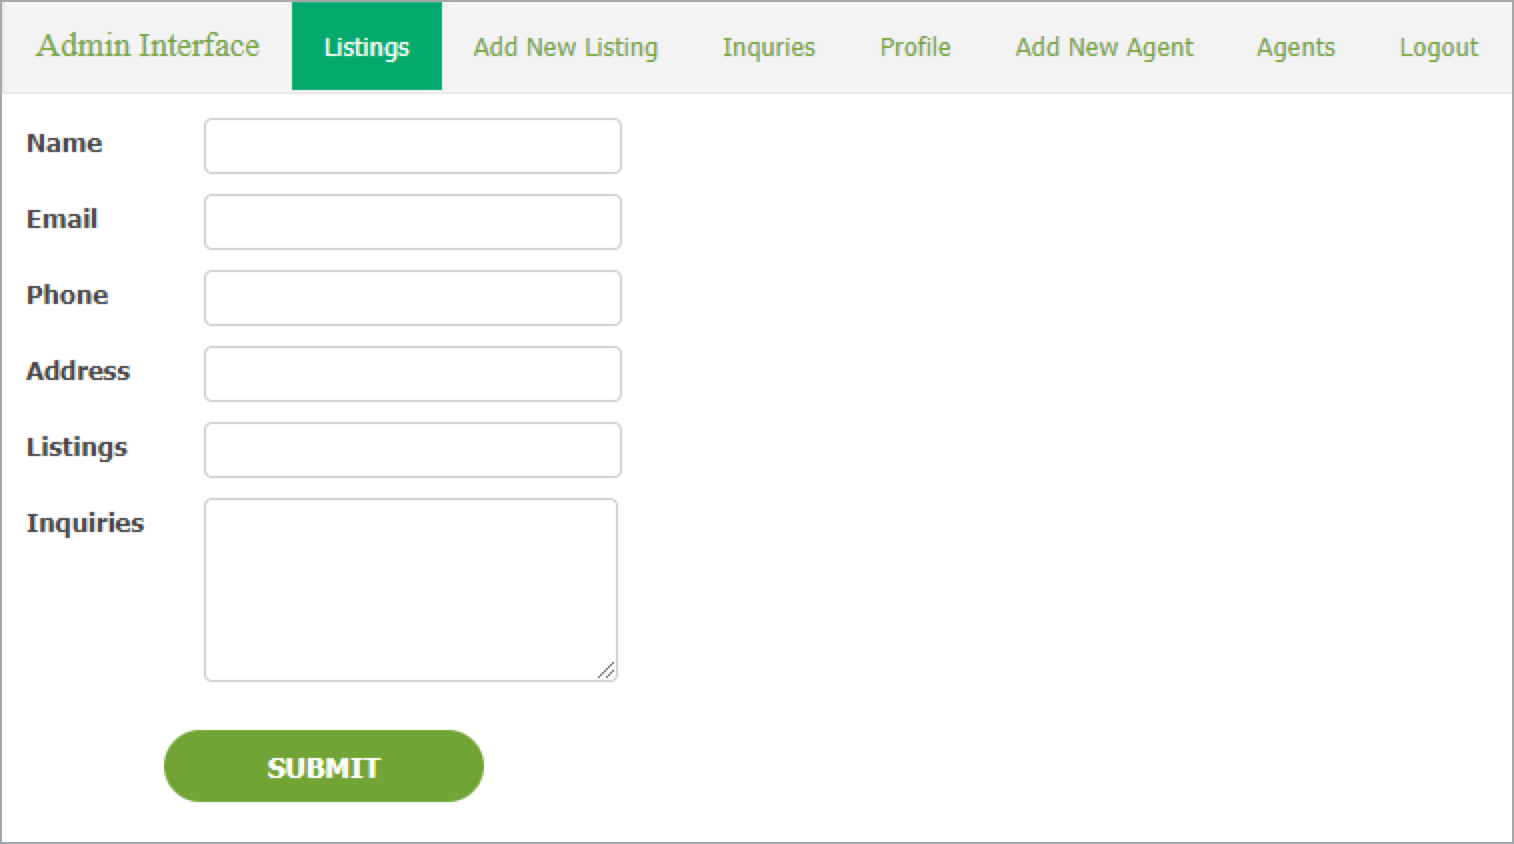 Sample navigation menu with customized options for admins.